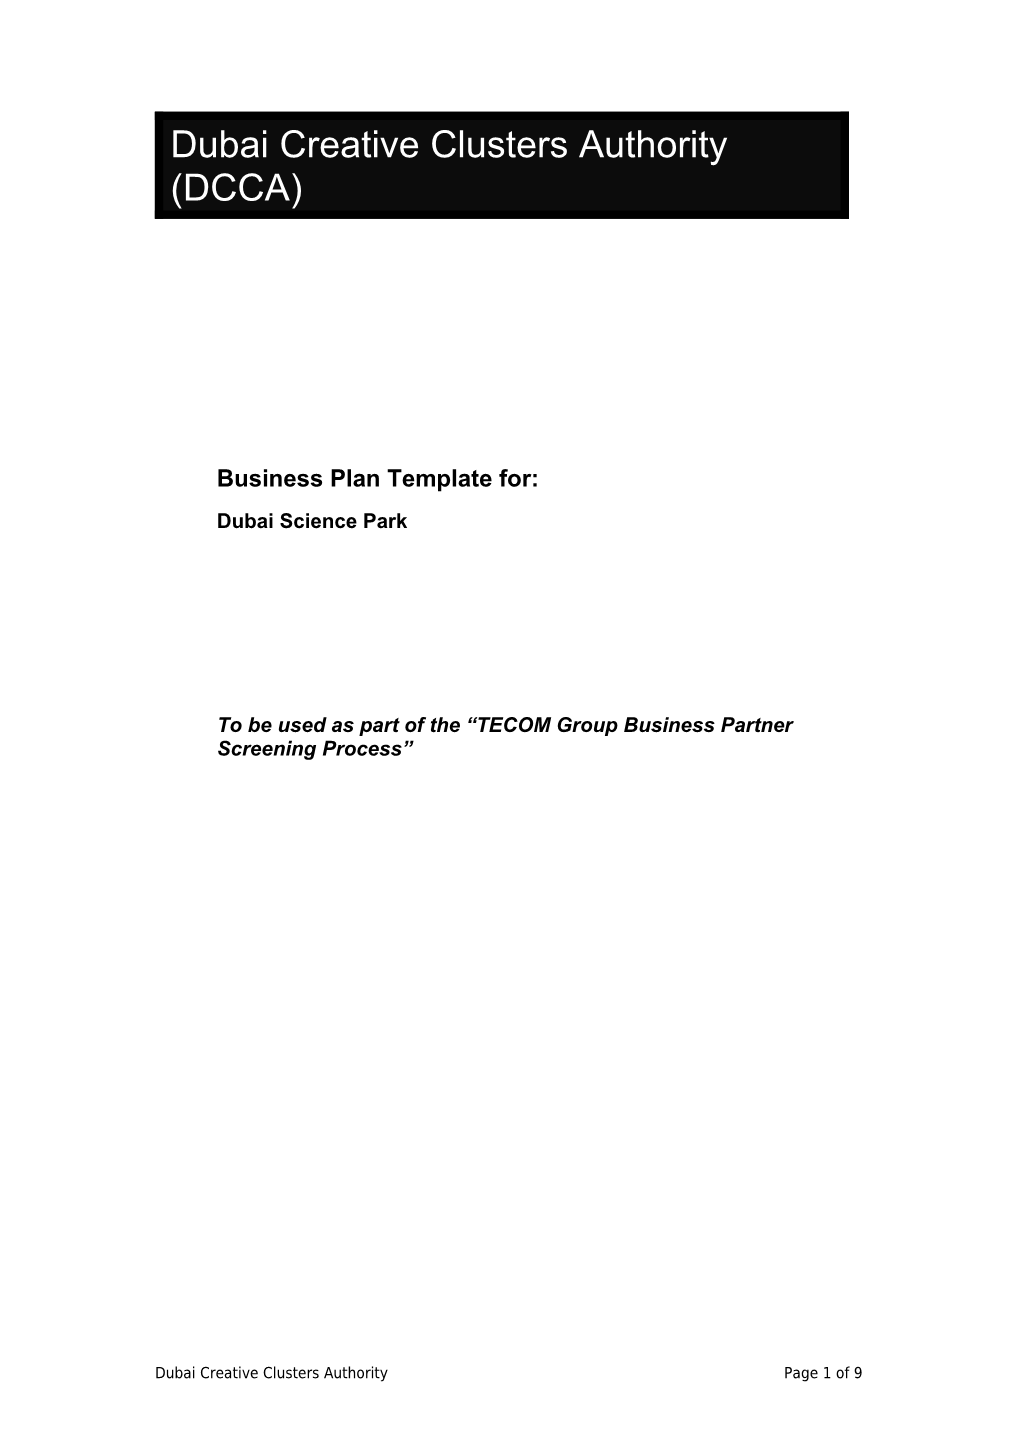 You Have Downloaded the Best Business Plan Template in Cyberspace